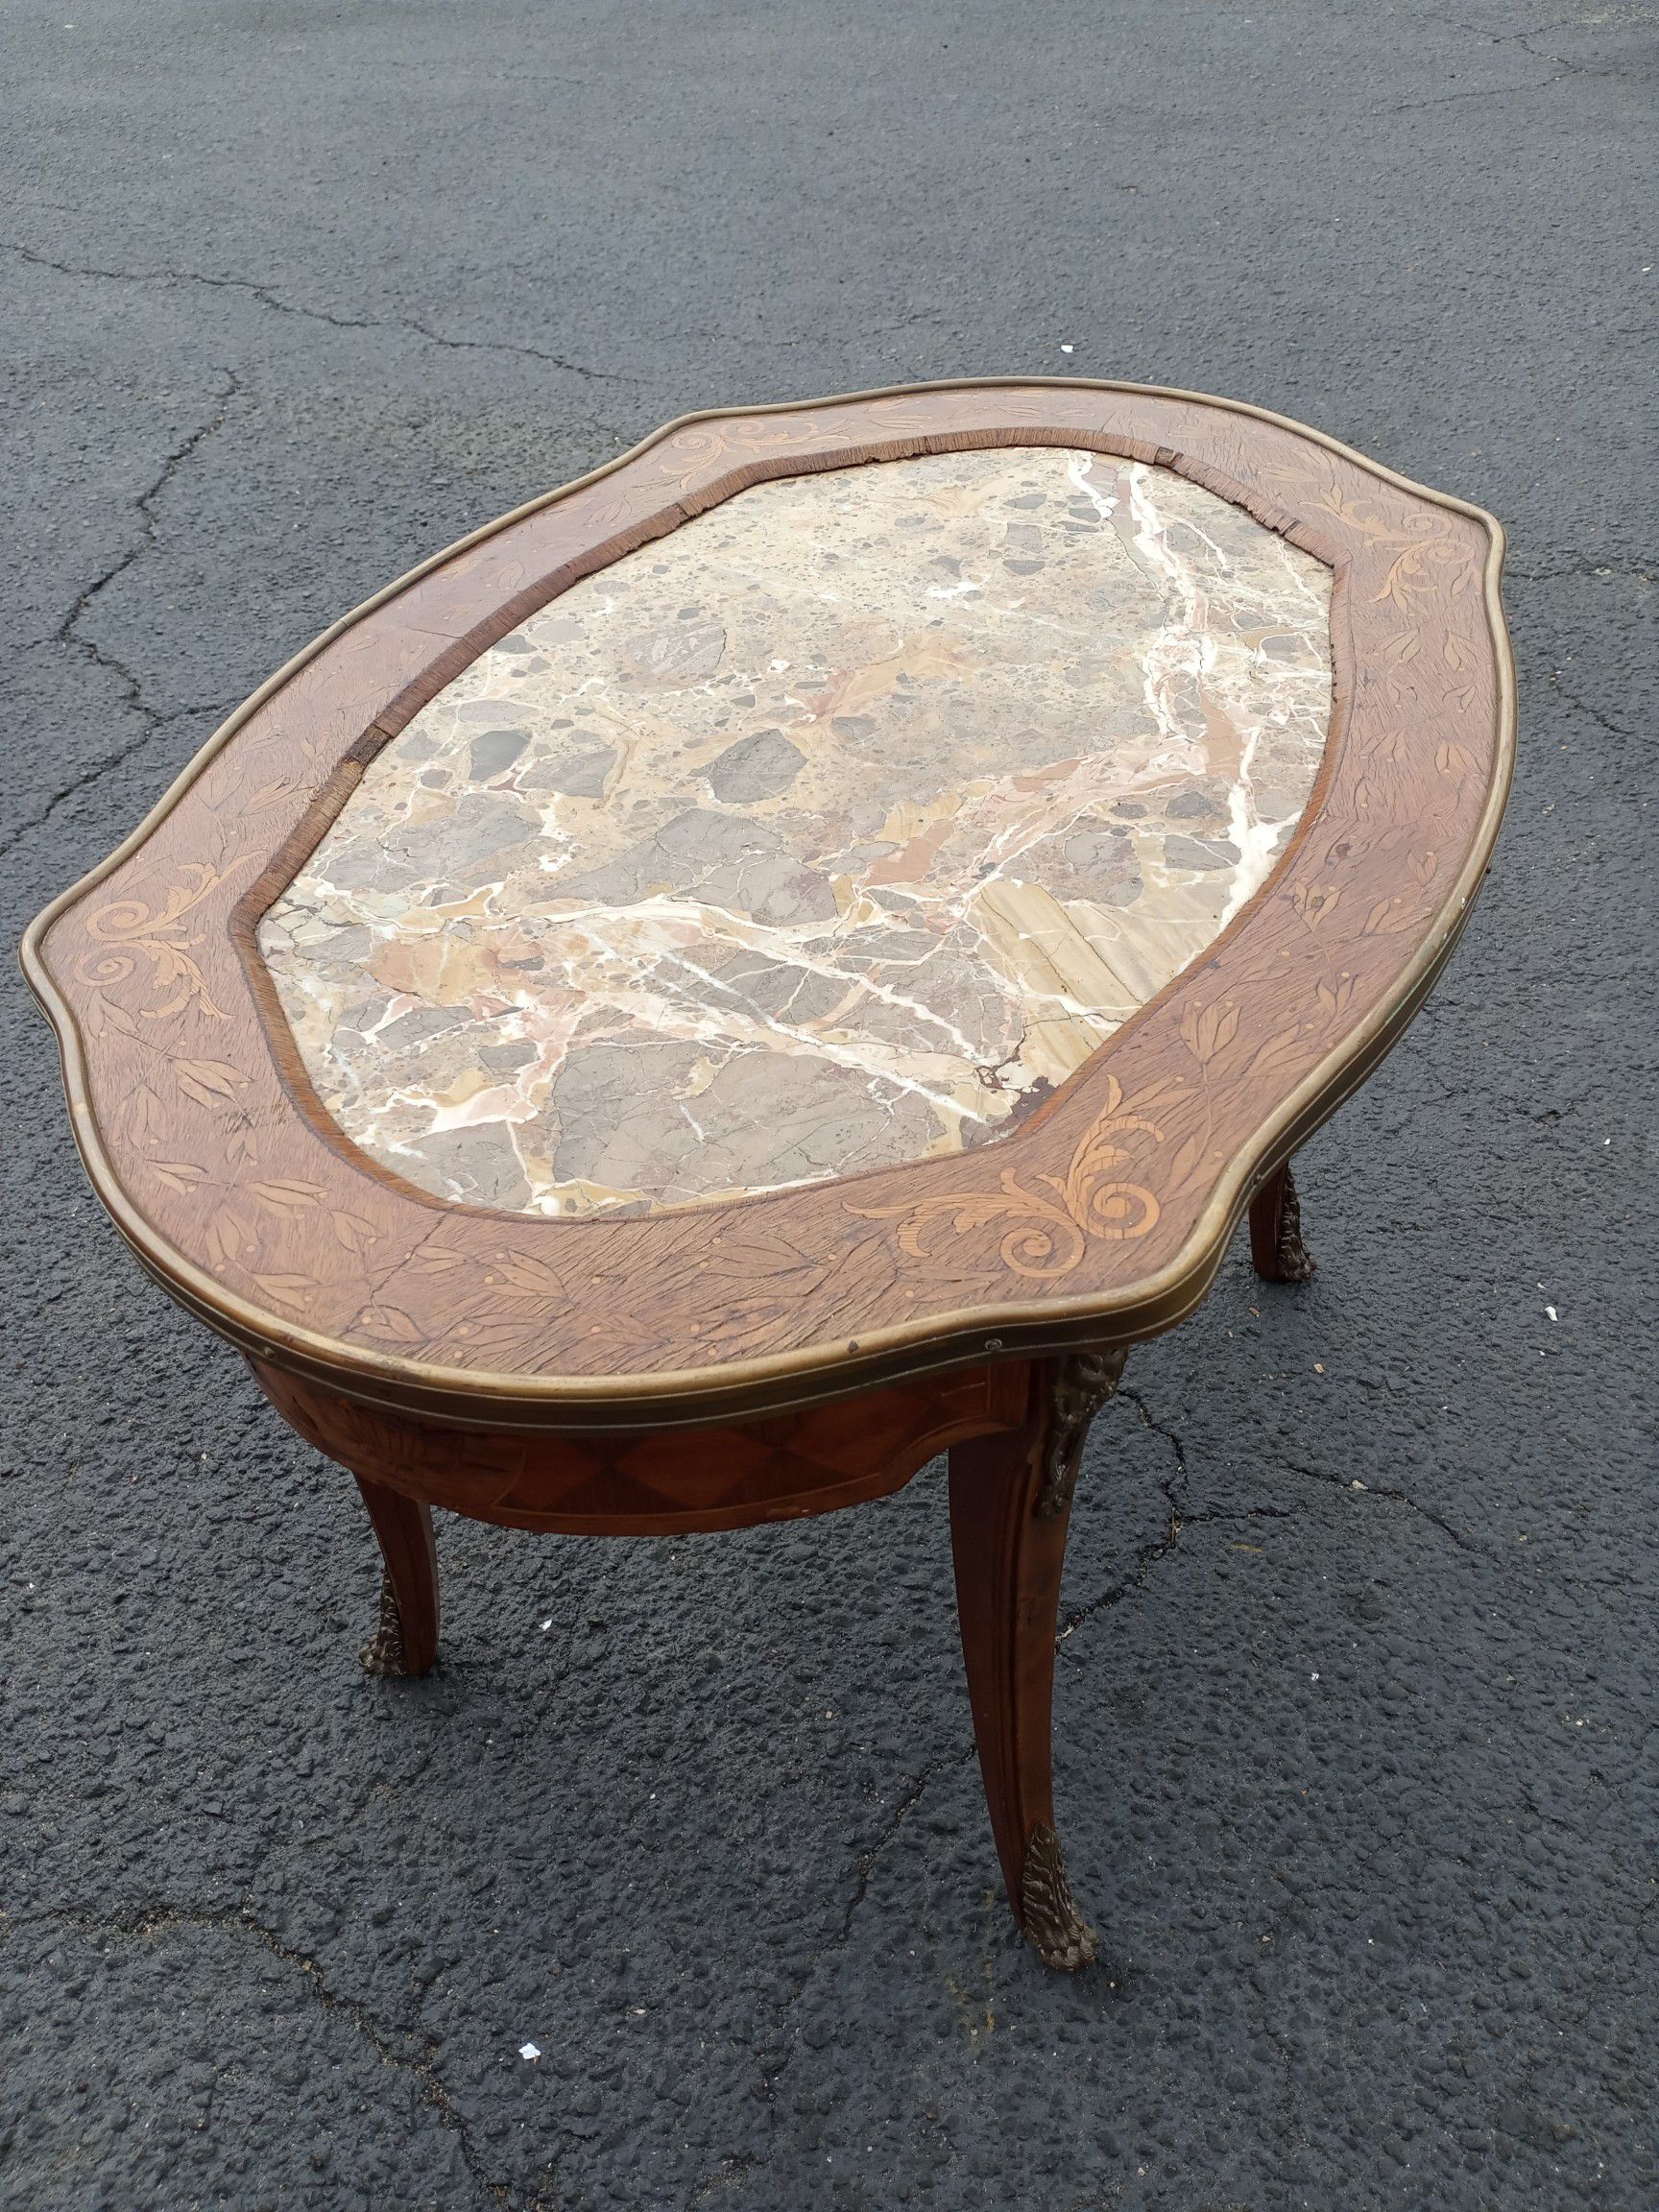 Antique Wood Table with Marble Inlay